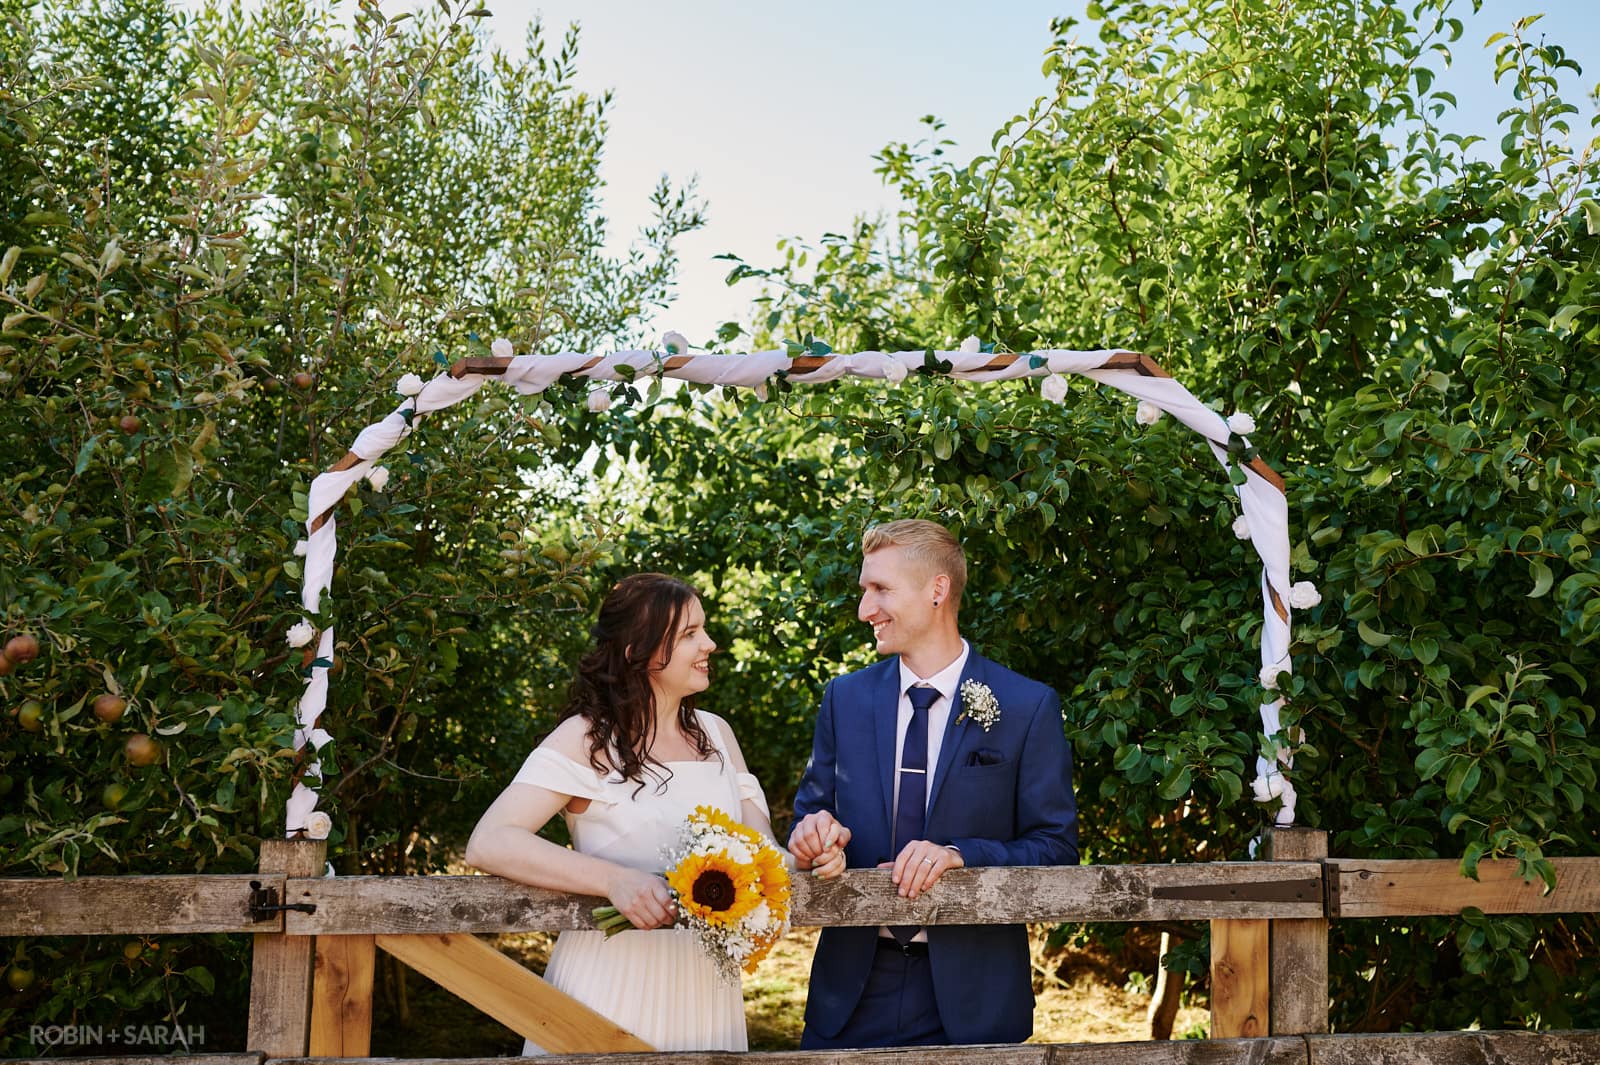 Bride and groom leaning on wooden fence and surrounded by bunting and greenery